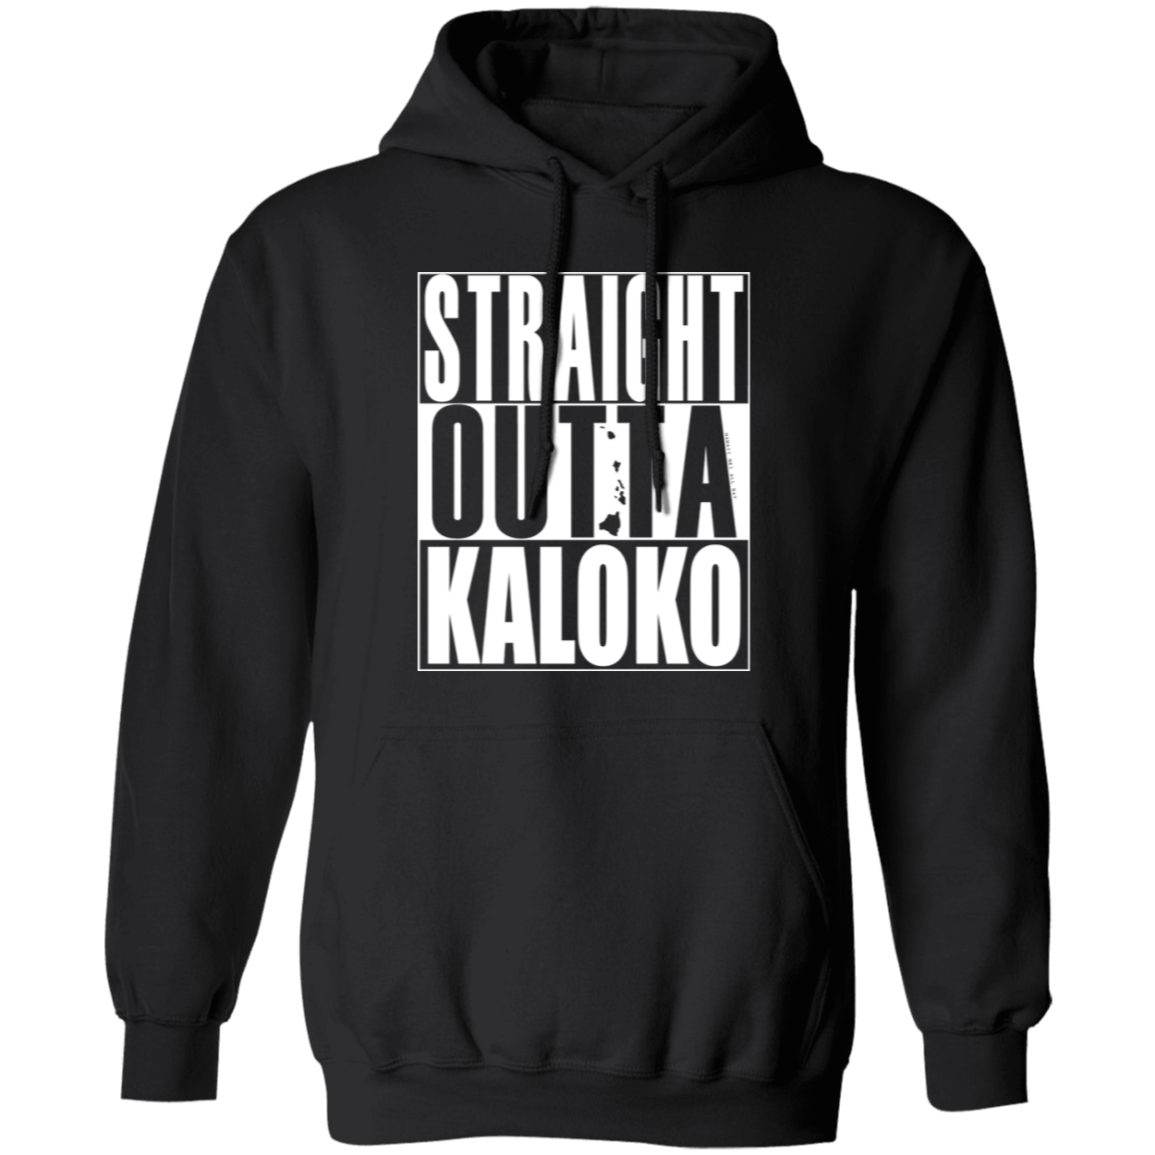 Straight Outta Kaloko (white ink) Pullover Hoodie